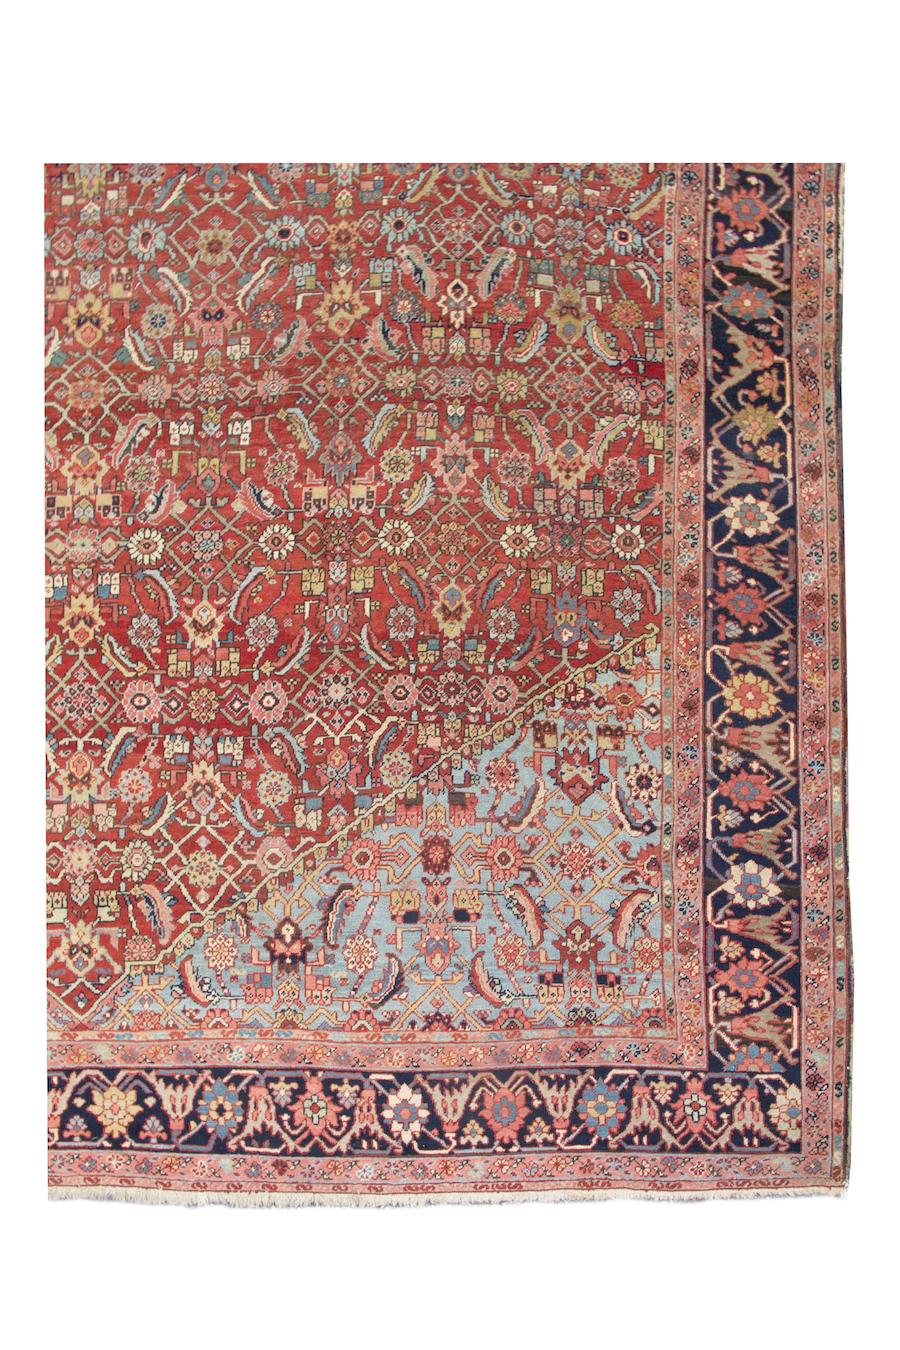 Antique Persian Heriz Long Rug, c. 1900

This extraordinary Heriz carpet from Northwest Persia uses a small-scale intricate lattice design composed of alternating blossoms, rosettes, and foliage known as the Herati ­pattern. While maintaining the